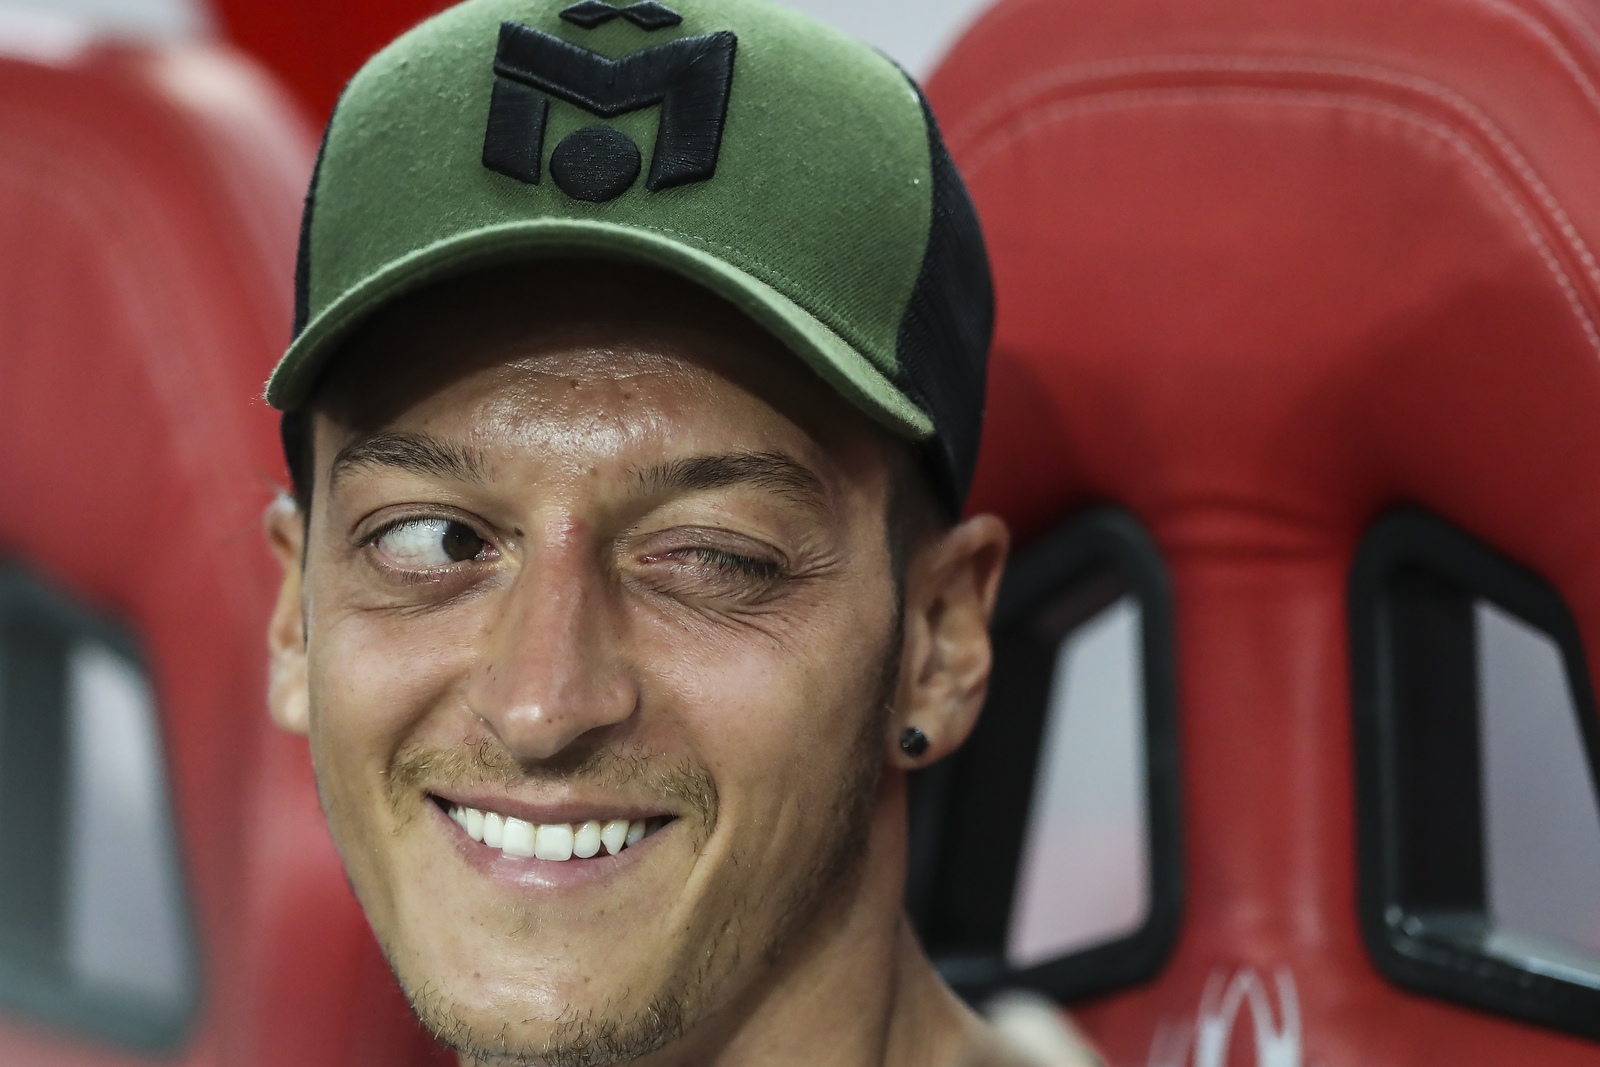  Arsenal’s Mesut Ozil winks to a teammate on the bench during the International Champions Cup match between Arsenal and Atletico Madrid in Singapore, Thursday, July 26, 2018. (AP Photo/Yong Teck Lim) 